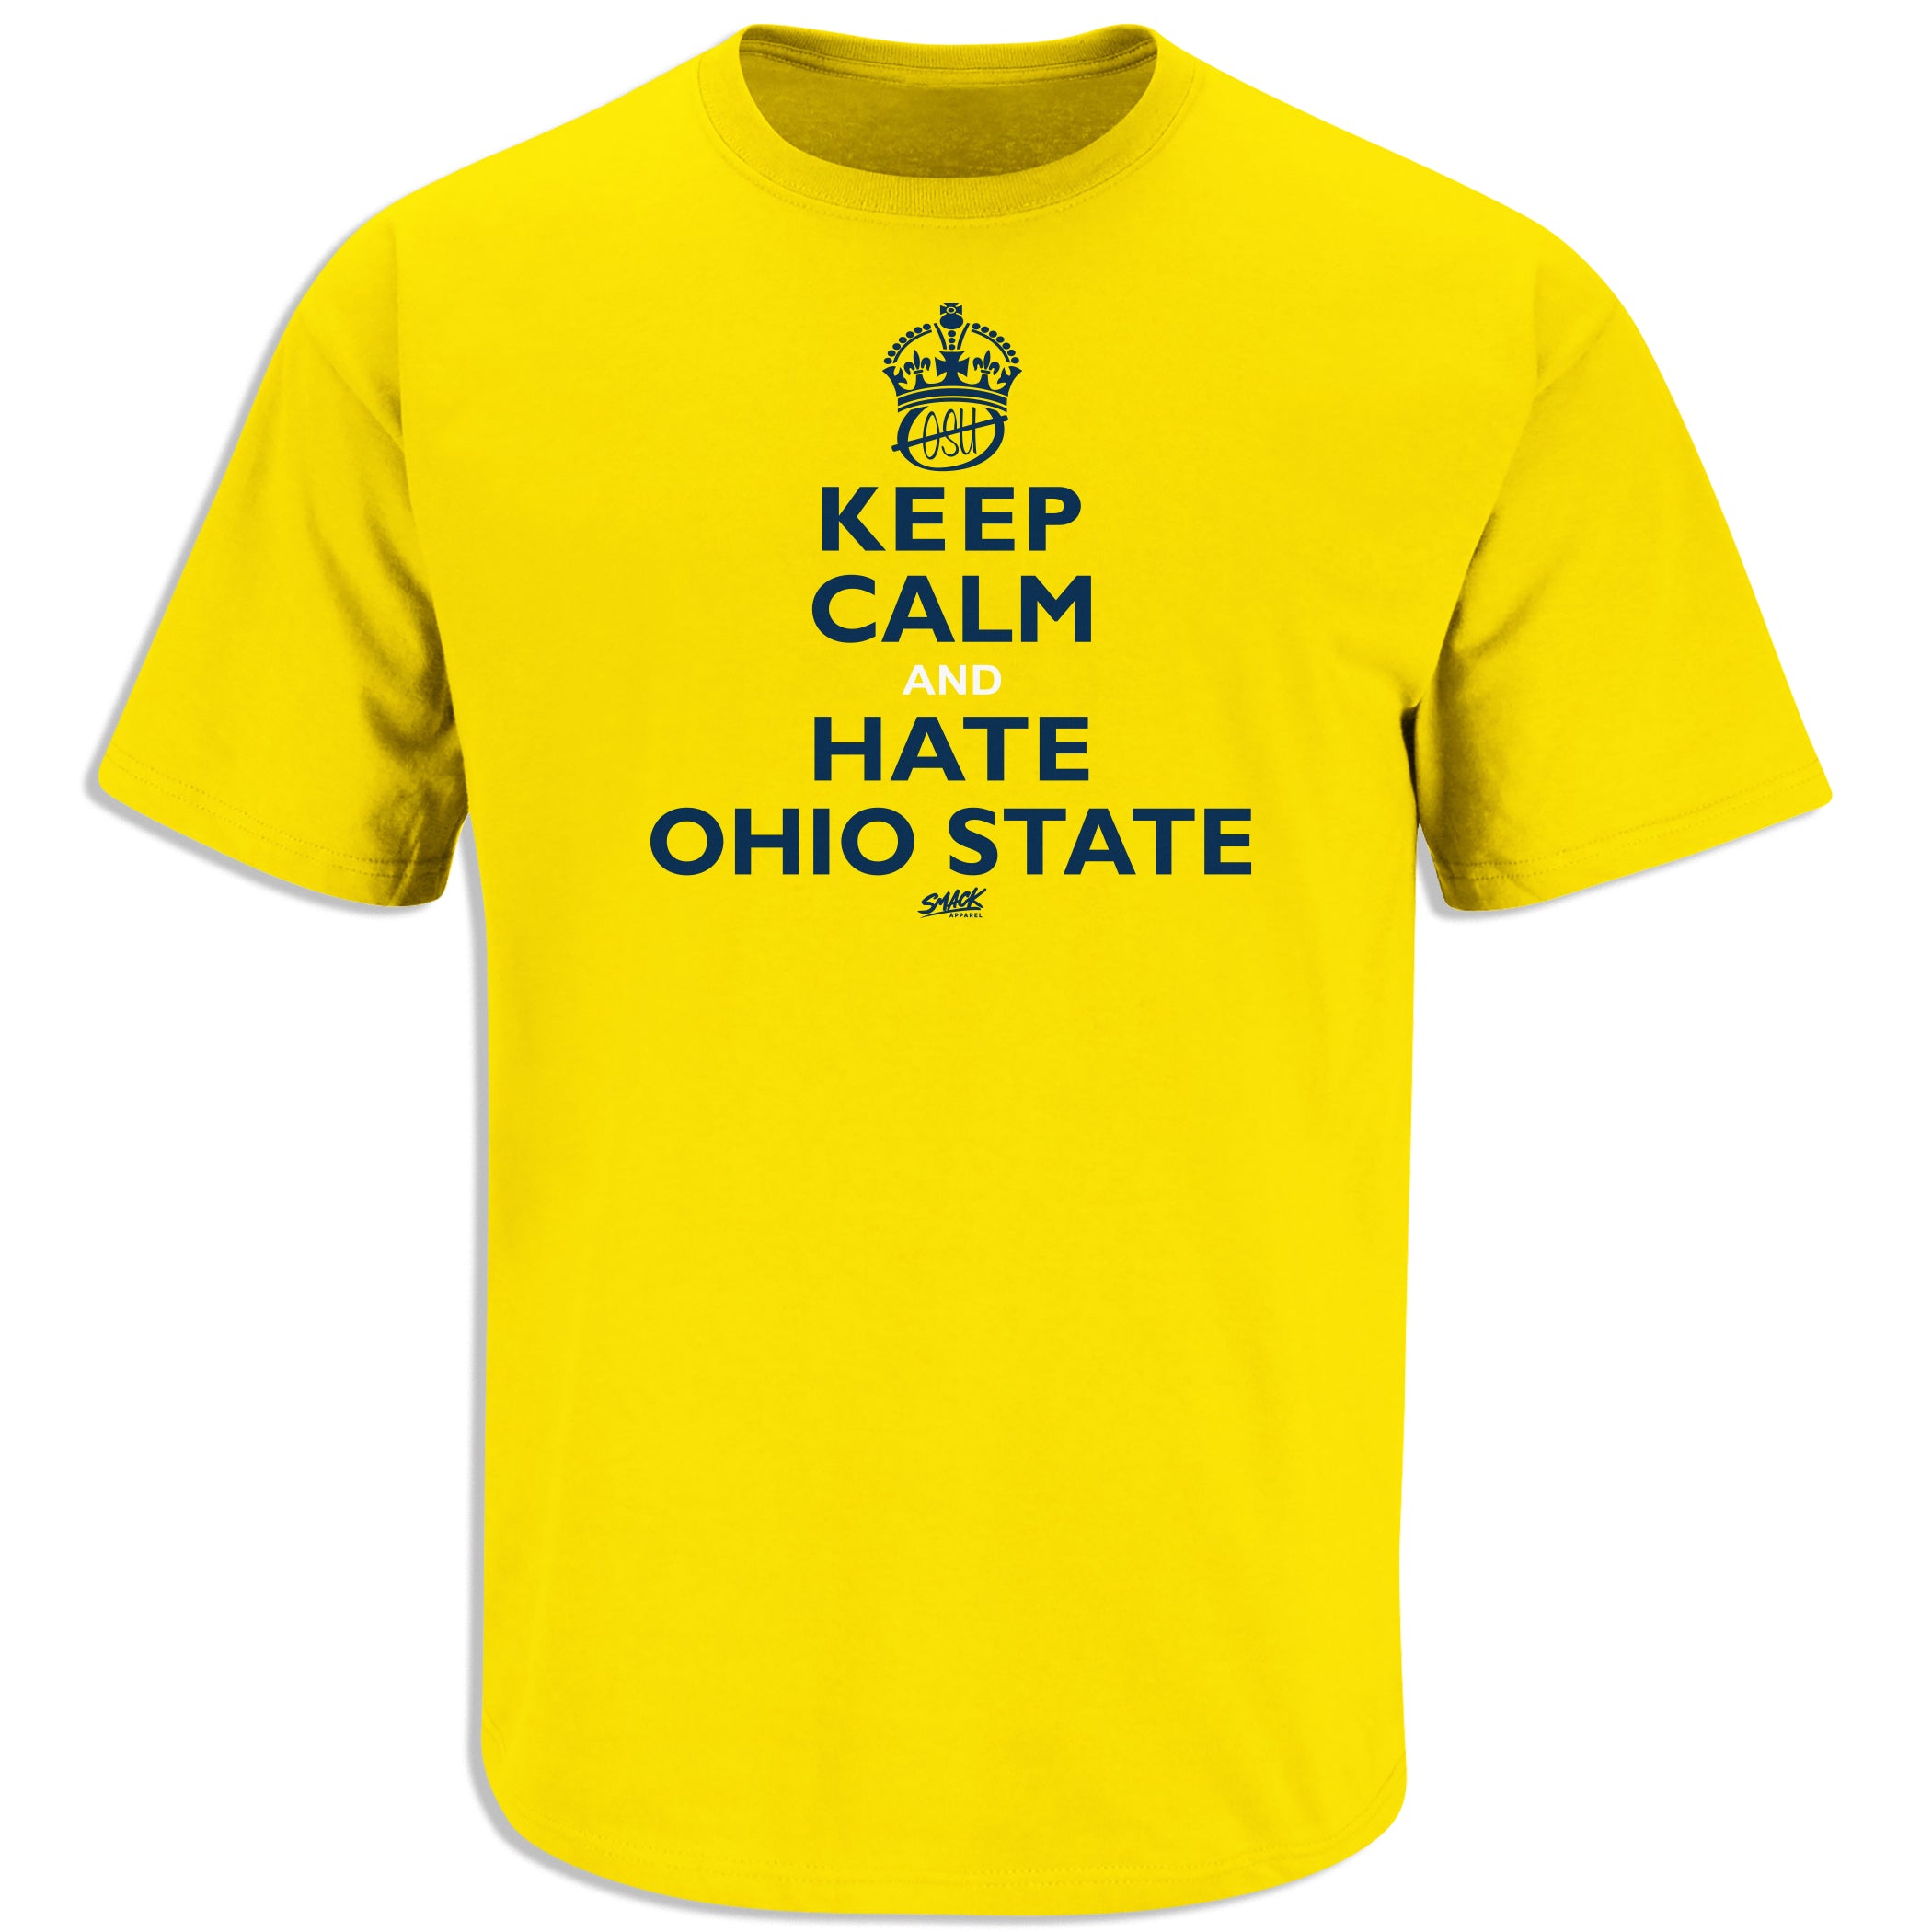 Michigan College Sports Apparel | Shop Unlicensed Michigan Gear | Keep Calm and Hate Ohio State Shirt Short Sleeve / Medium / Maize